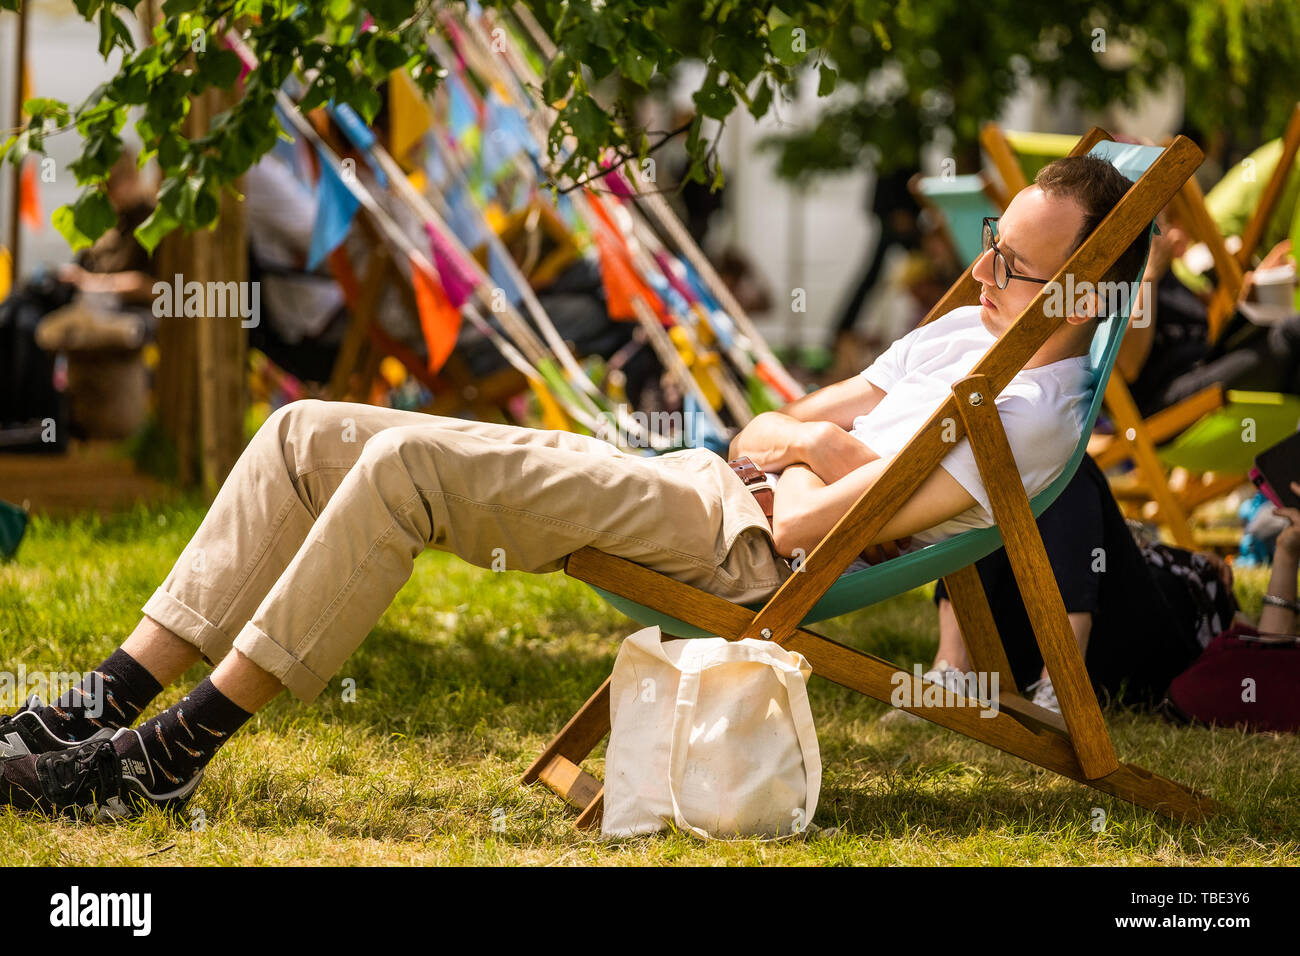 The Hay Festival, Hay on Wye, Wales UK , Saturday 01 June 2019.   People enjoying a scorching hot sunny first day of summer, Jue 1st,   at the 2019 Hay Festival   The festival, now in its 32nd year, held annually in the small town of Hay on Wye on the Wales - England border,  attracts the finest writers, politicians and intellectuals from  across the globe for 10 days of talks and discussions, celebrating the best of the written word and critical debate  Photo © Keith Morris / Alamy Live News Stock Photo